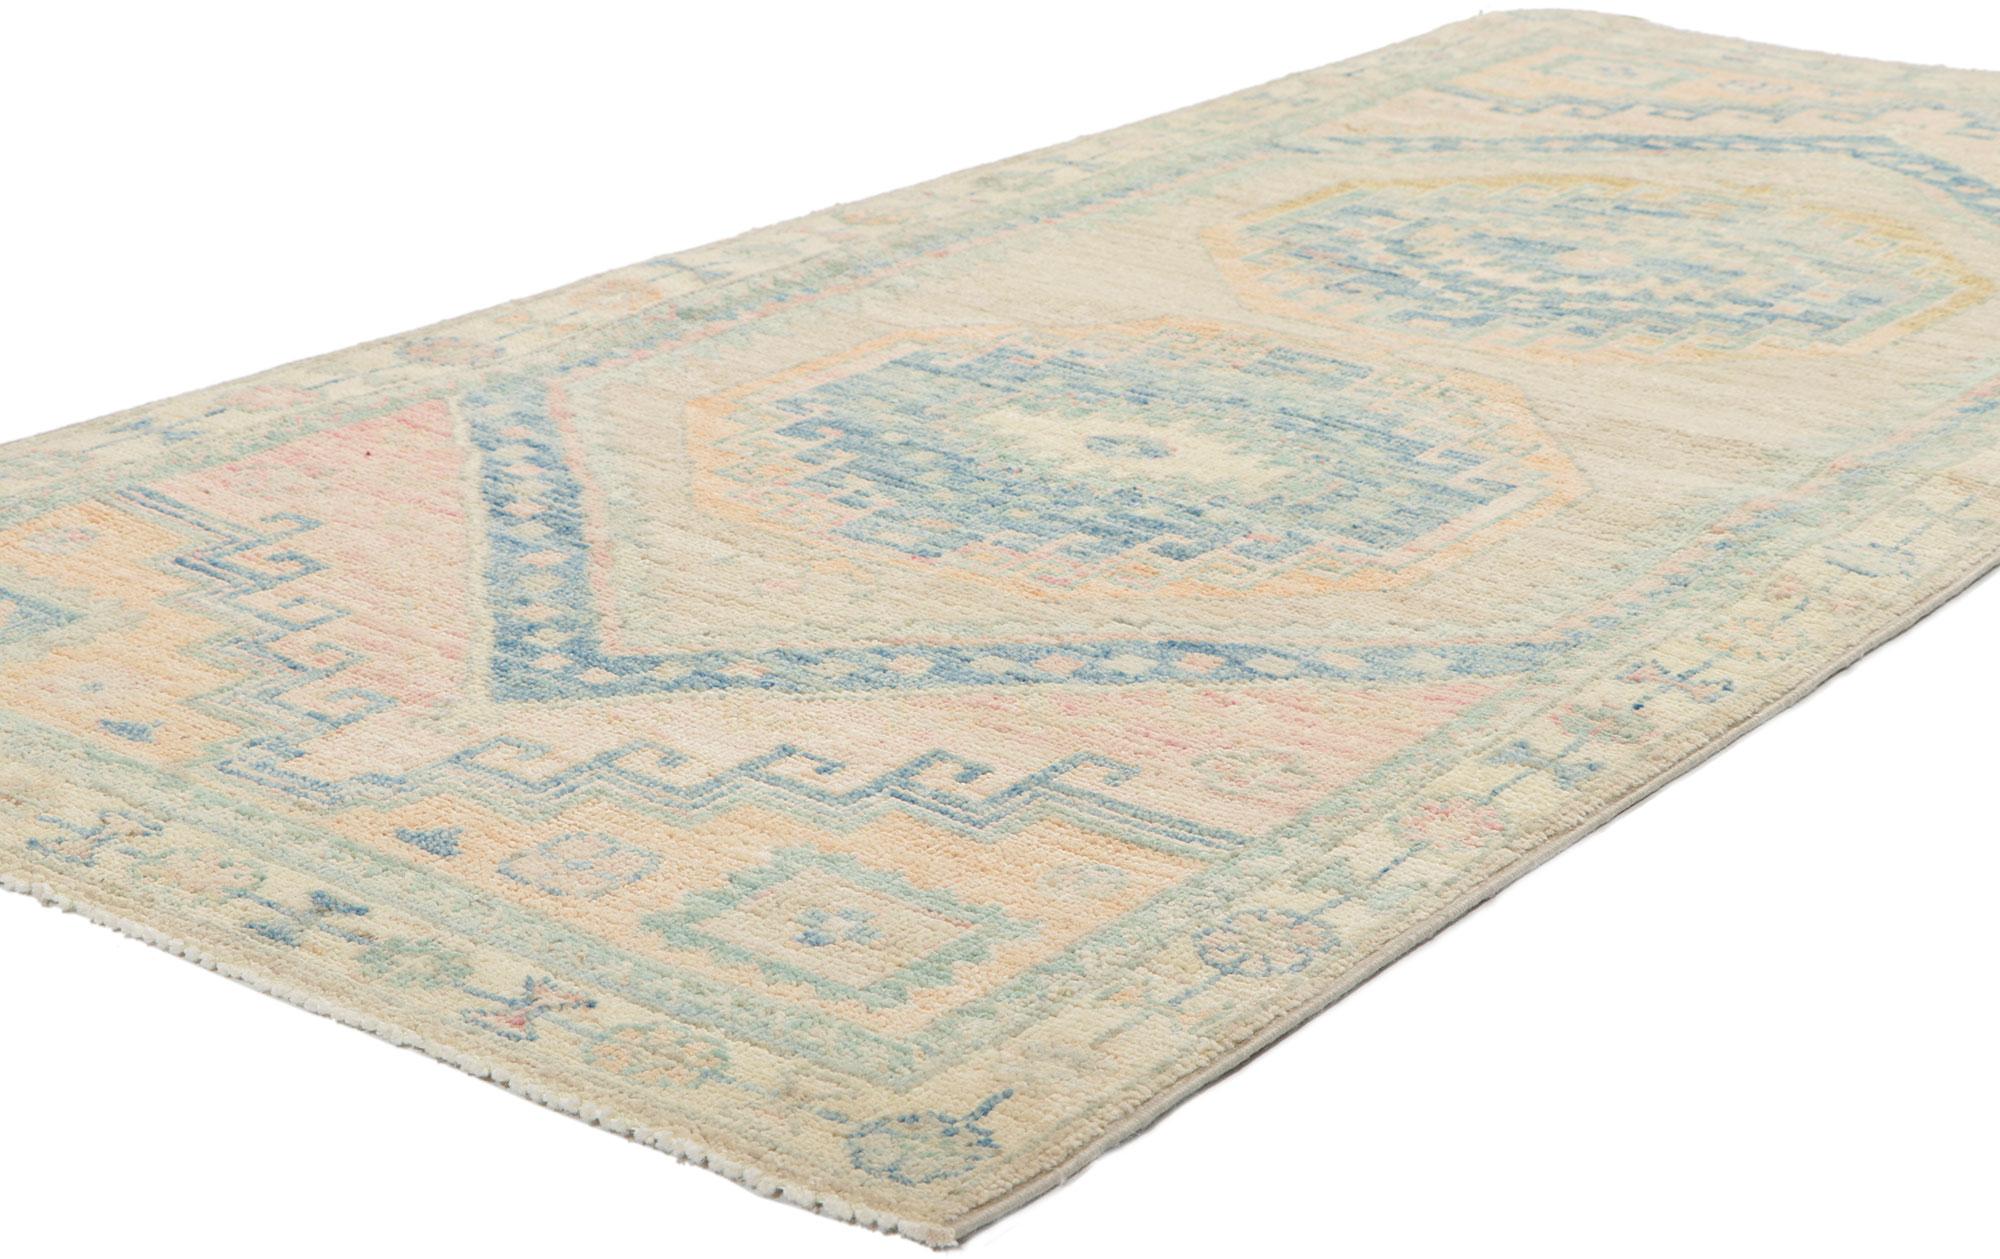 80852 New Modern style oushak rug with soft colors, 03'01 x 06'05. Polished and playful, this hand-knotted wool contemporary Contemporary Oushak rug beautifully embodies a modern style. The composition features an all-over botanical pattern composed